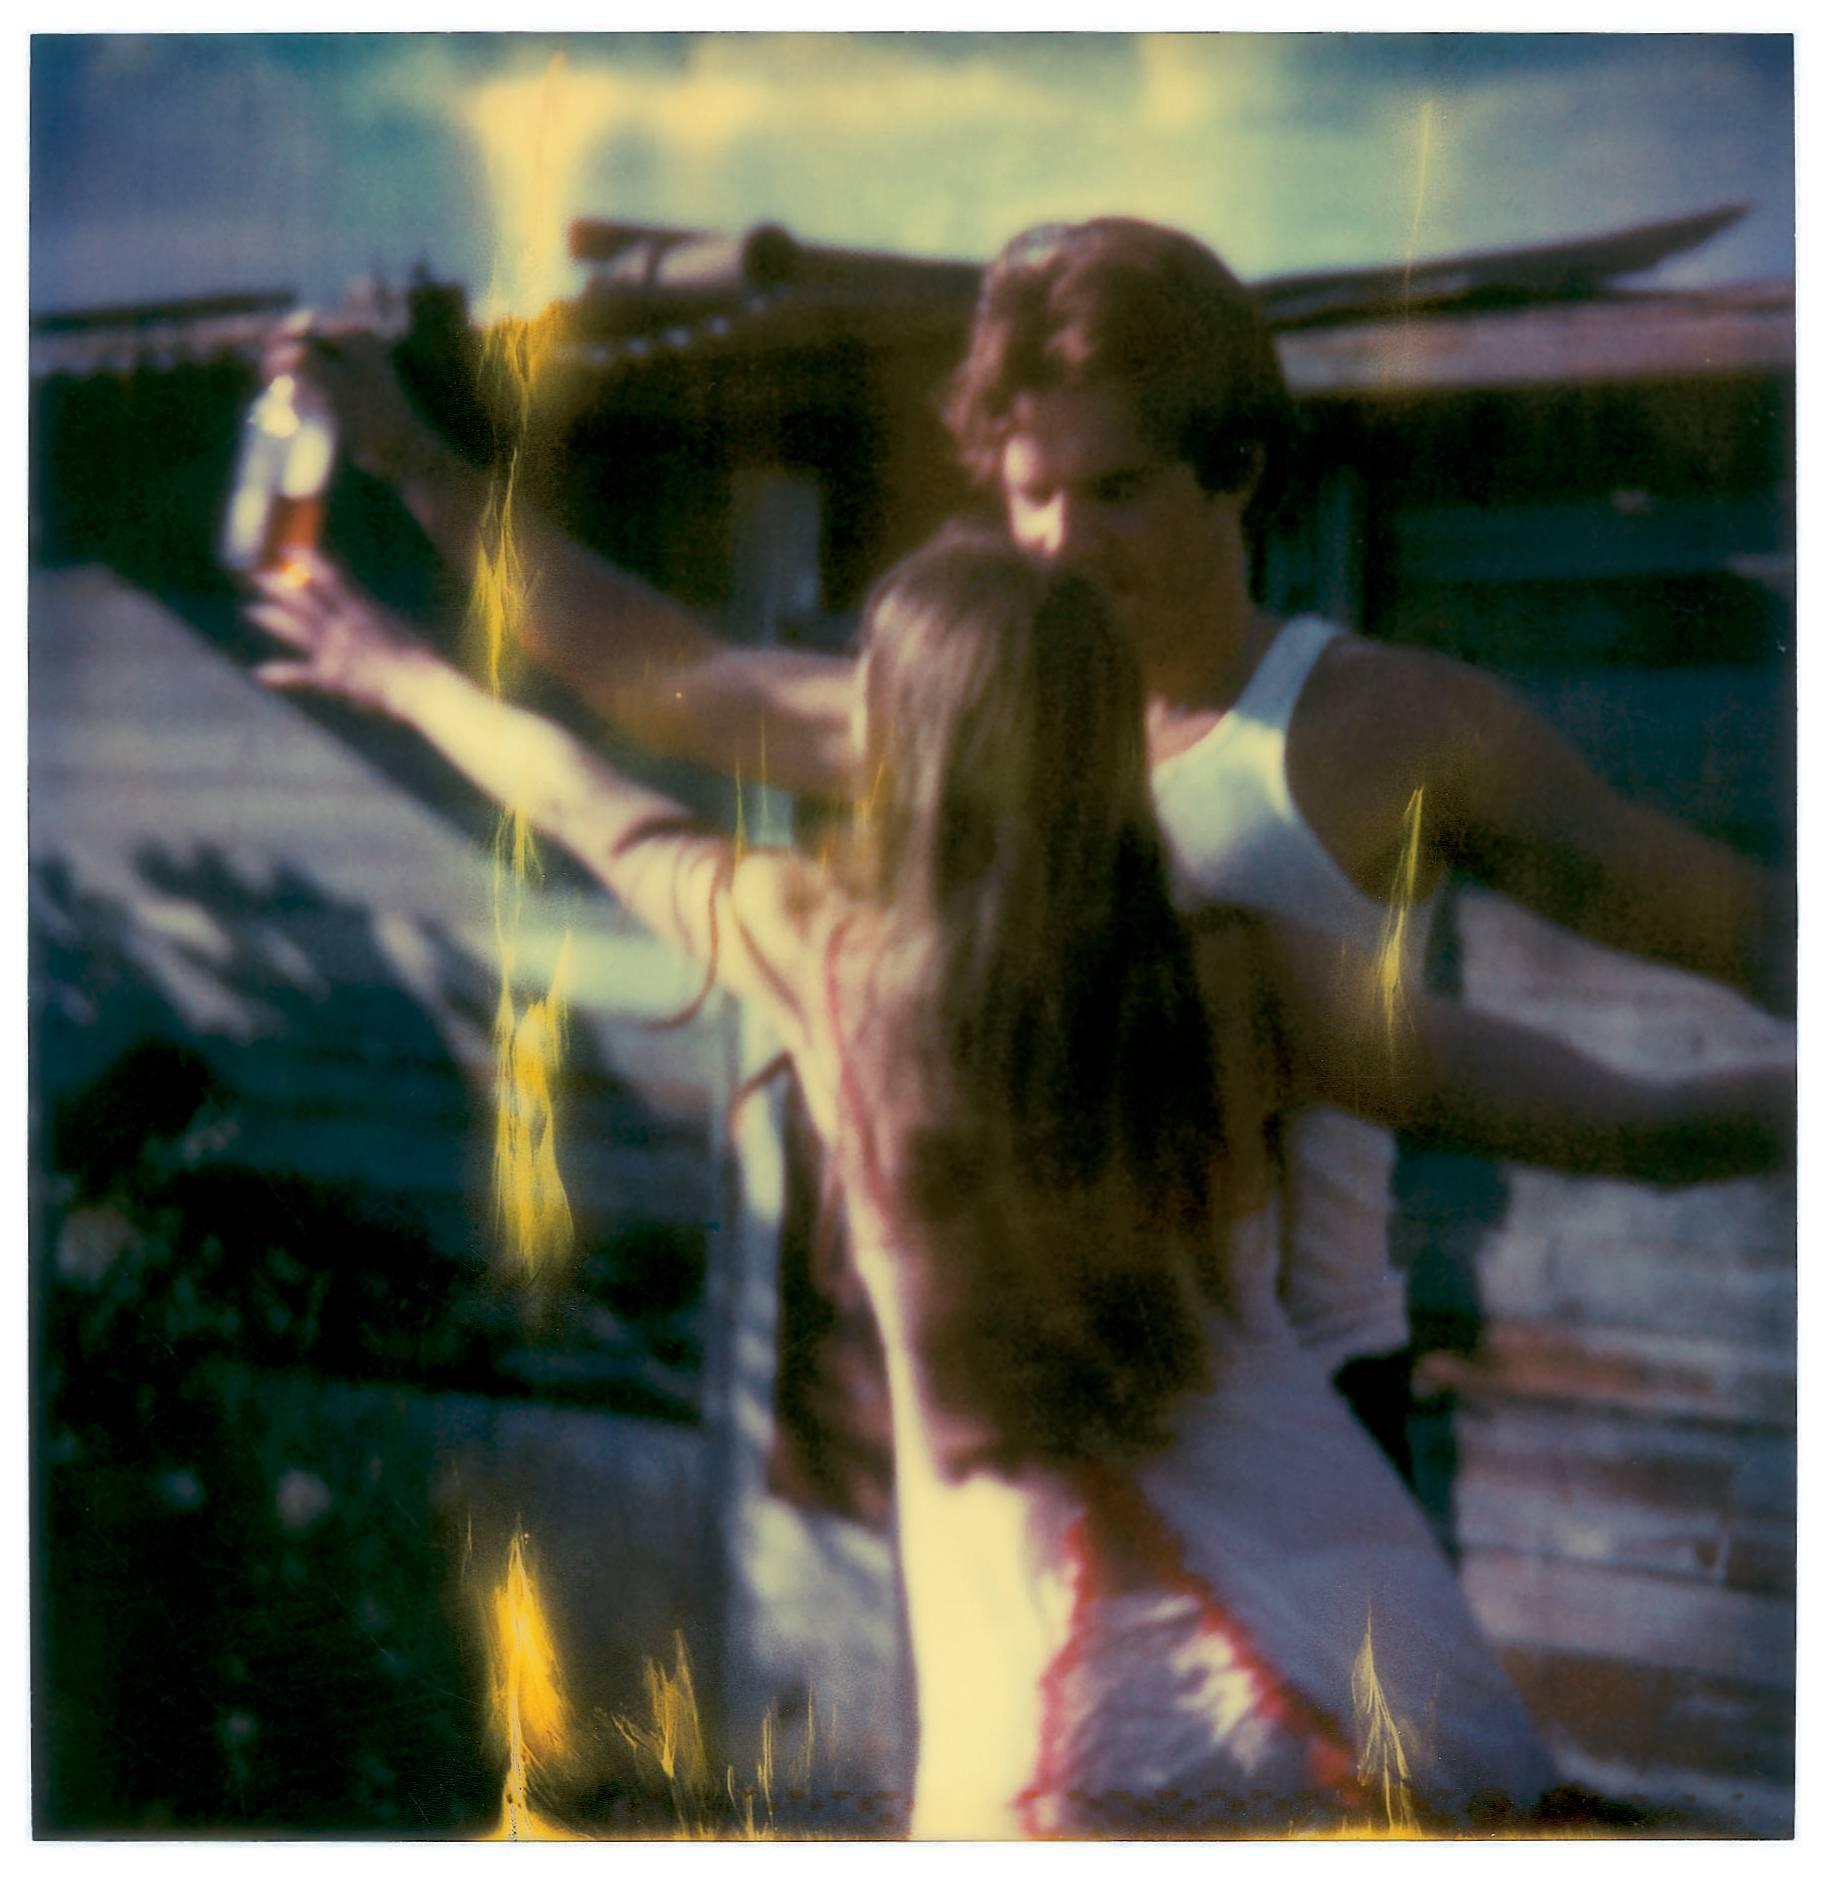 Whisky Dance I (Sidewinder) - 2005, 

Edition of 10, plus 2 Artist Proofs. 
20x20cm each, installed including gaps 50x90cm, 8 pieces. 
8 Archival C-Prints, based on the 8 original Polaroid.  
Certificate and Signature label, 
Artist Inventory Nr.